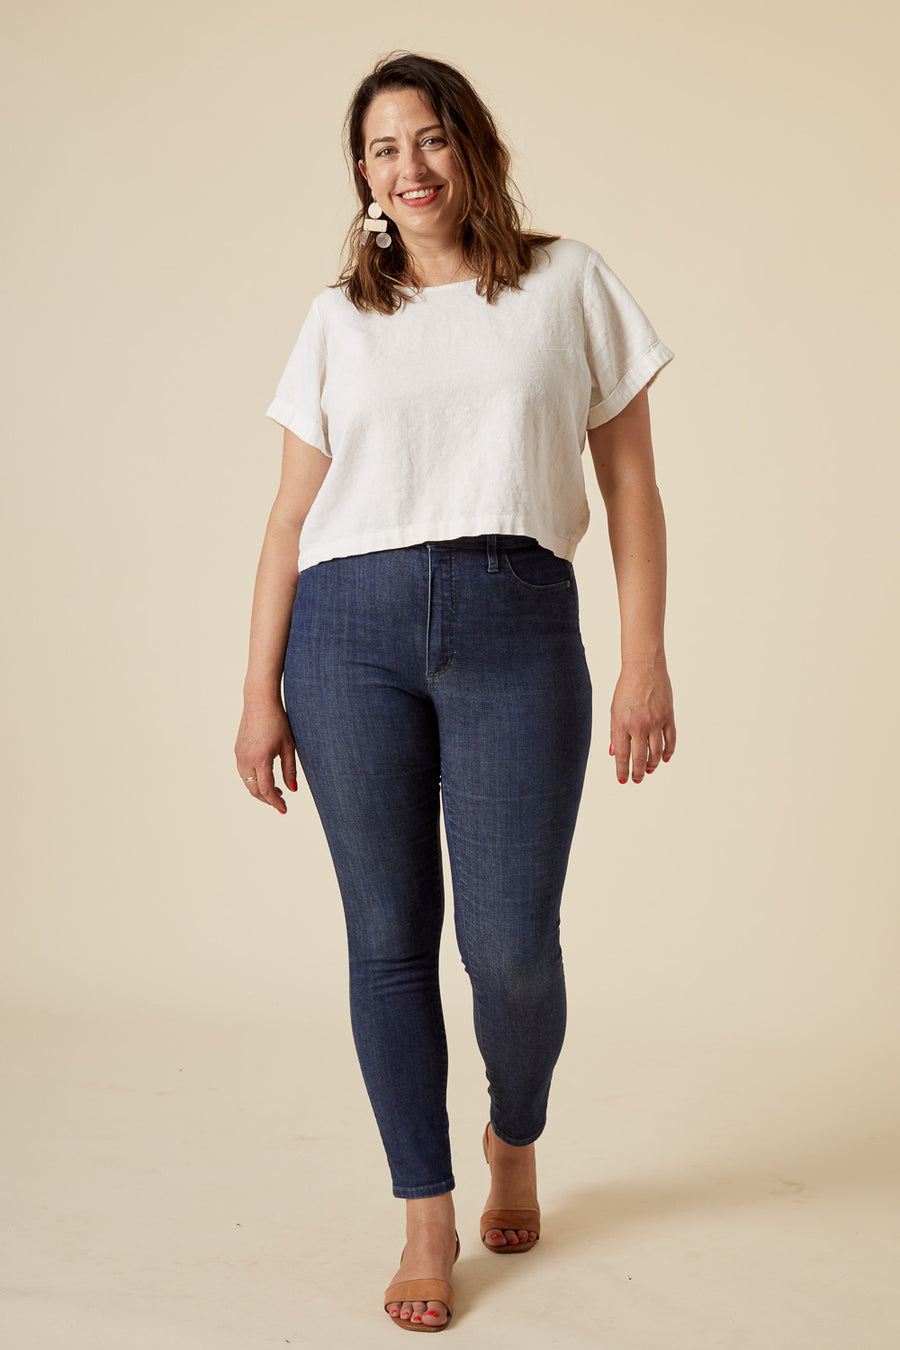 Women's Super Skinny Jeans: Fitted, Tight, Comfortable | Diesel®